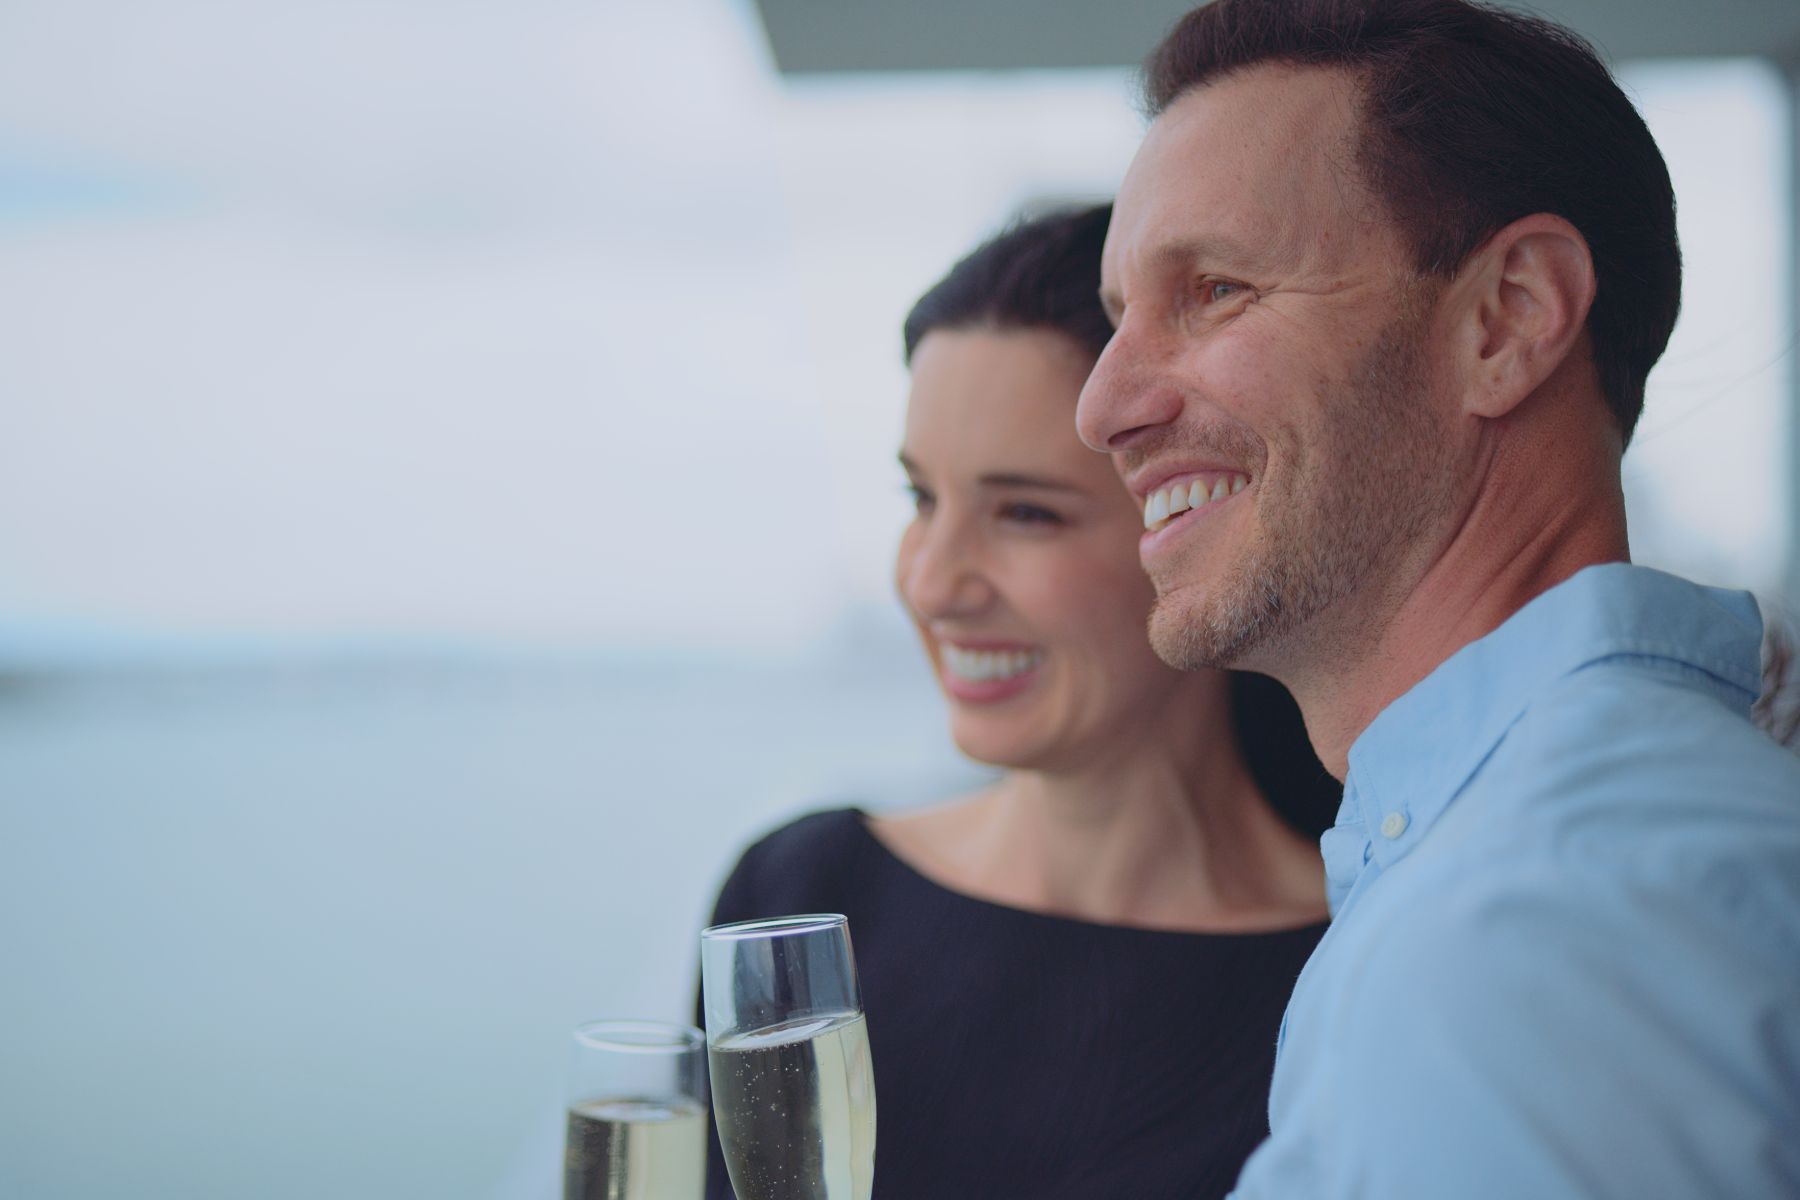 IU C&I Studios Portfolio Macken Koya Bay Side profile of man and woman smiling looking out over the water holding drinks